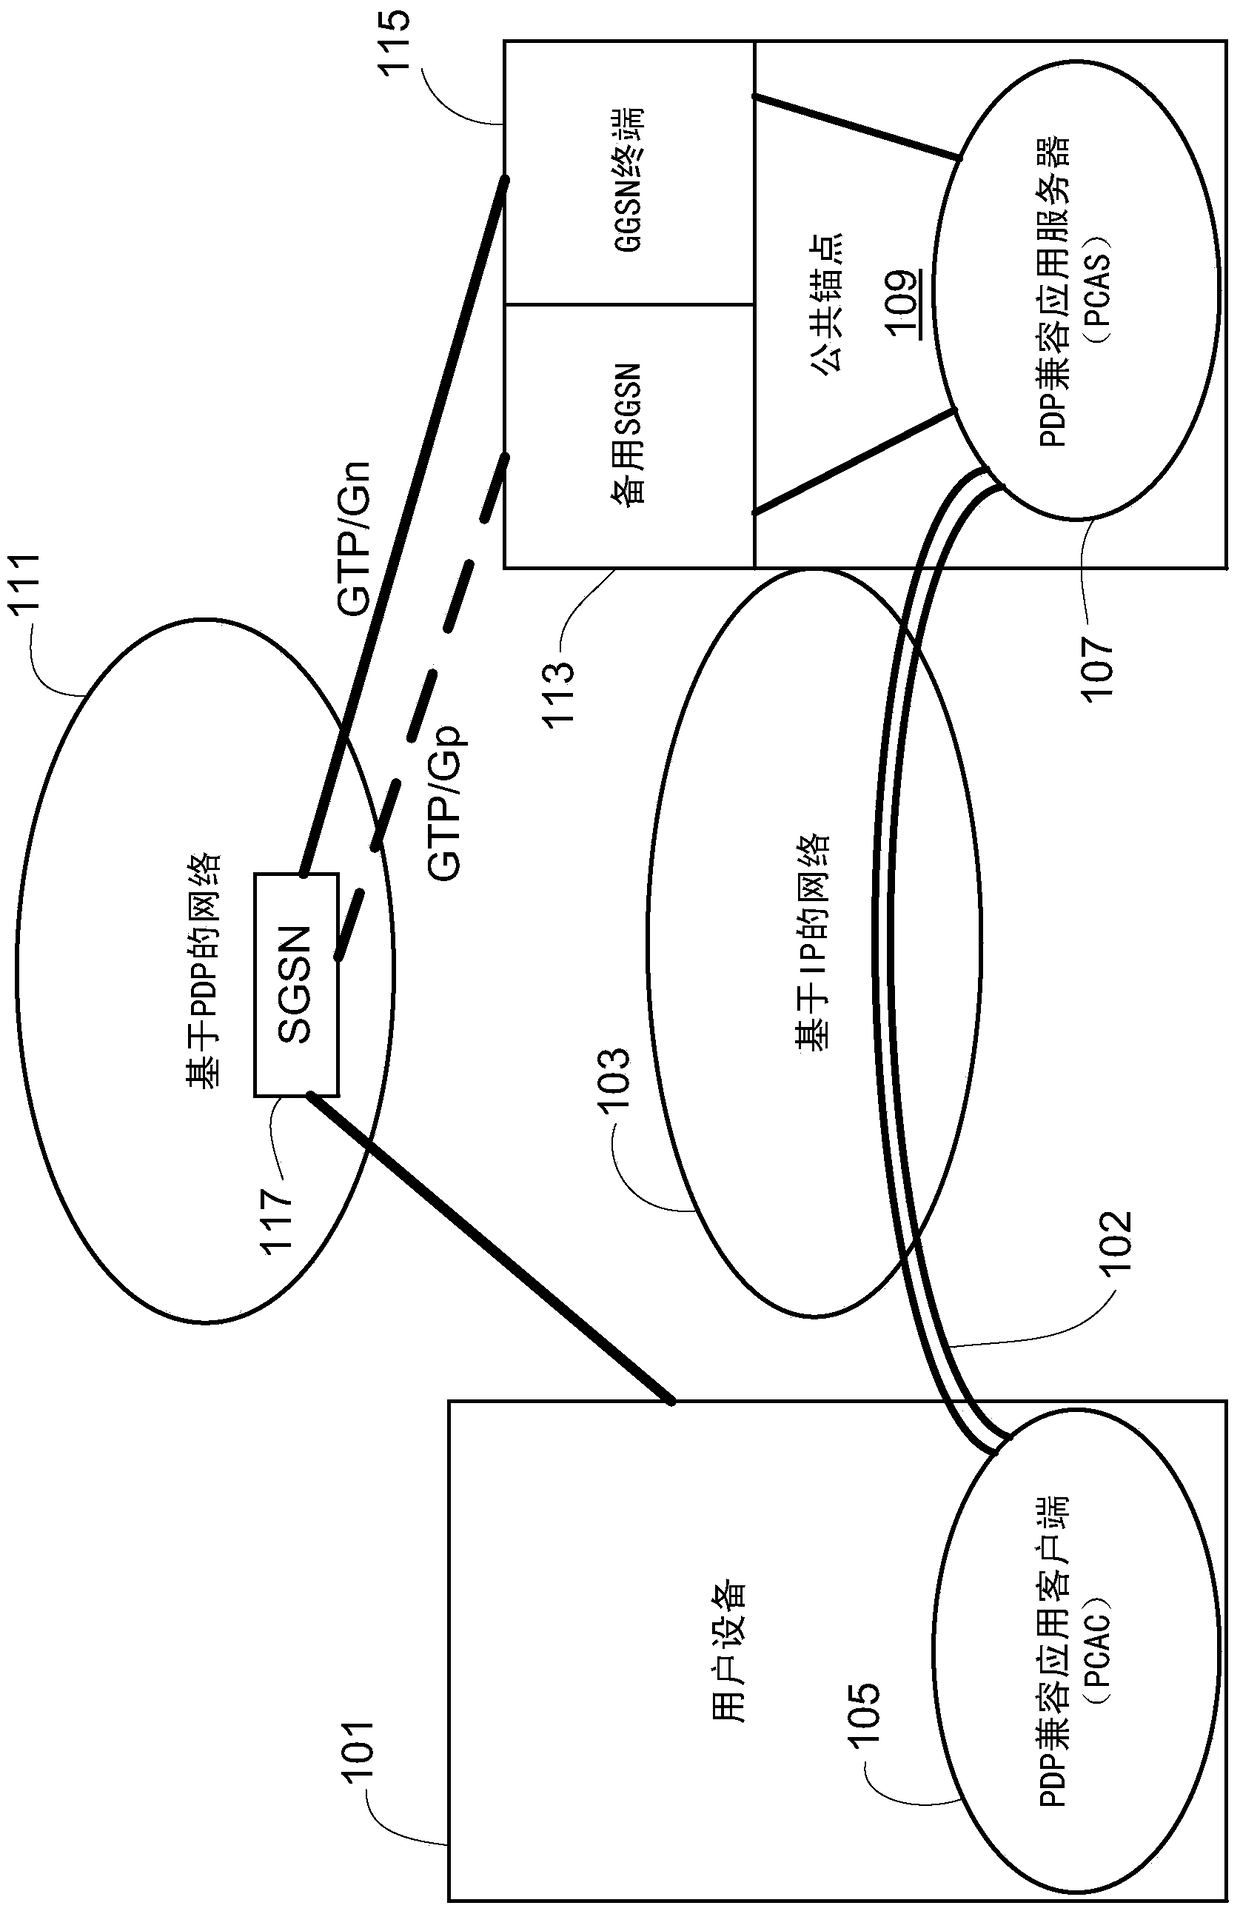 Method and apparatus for providing system interoperability in wireless communication